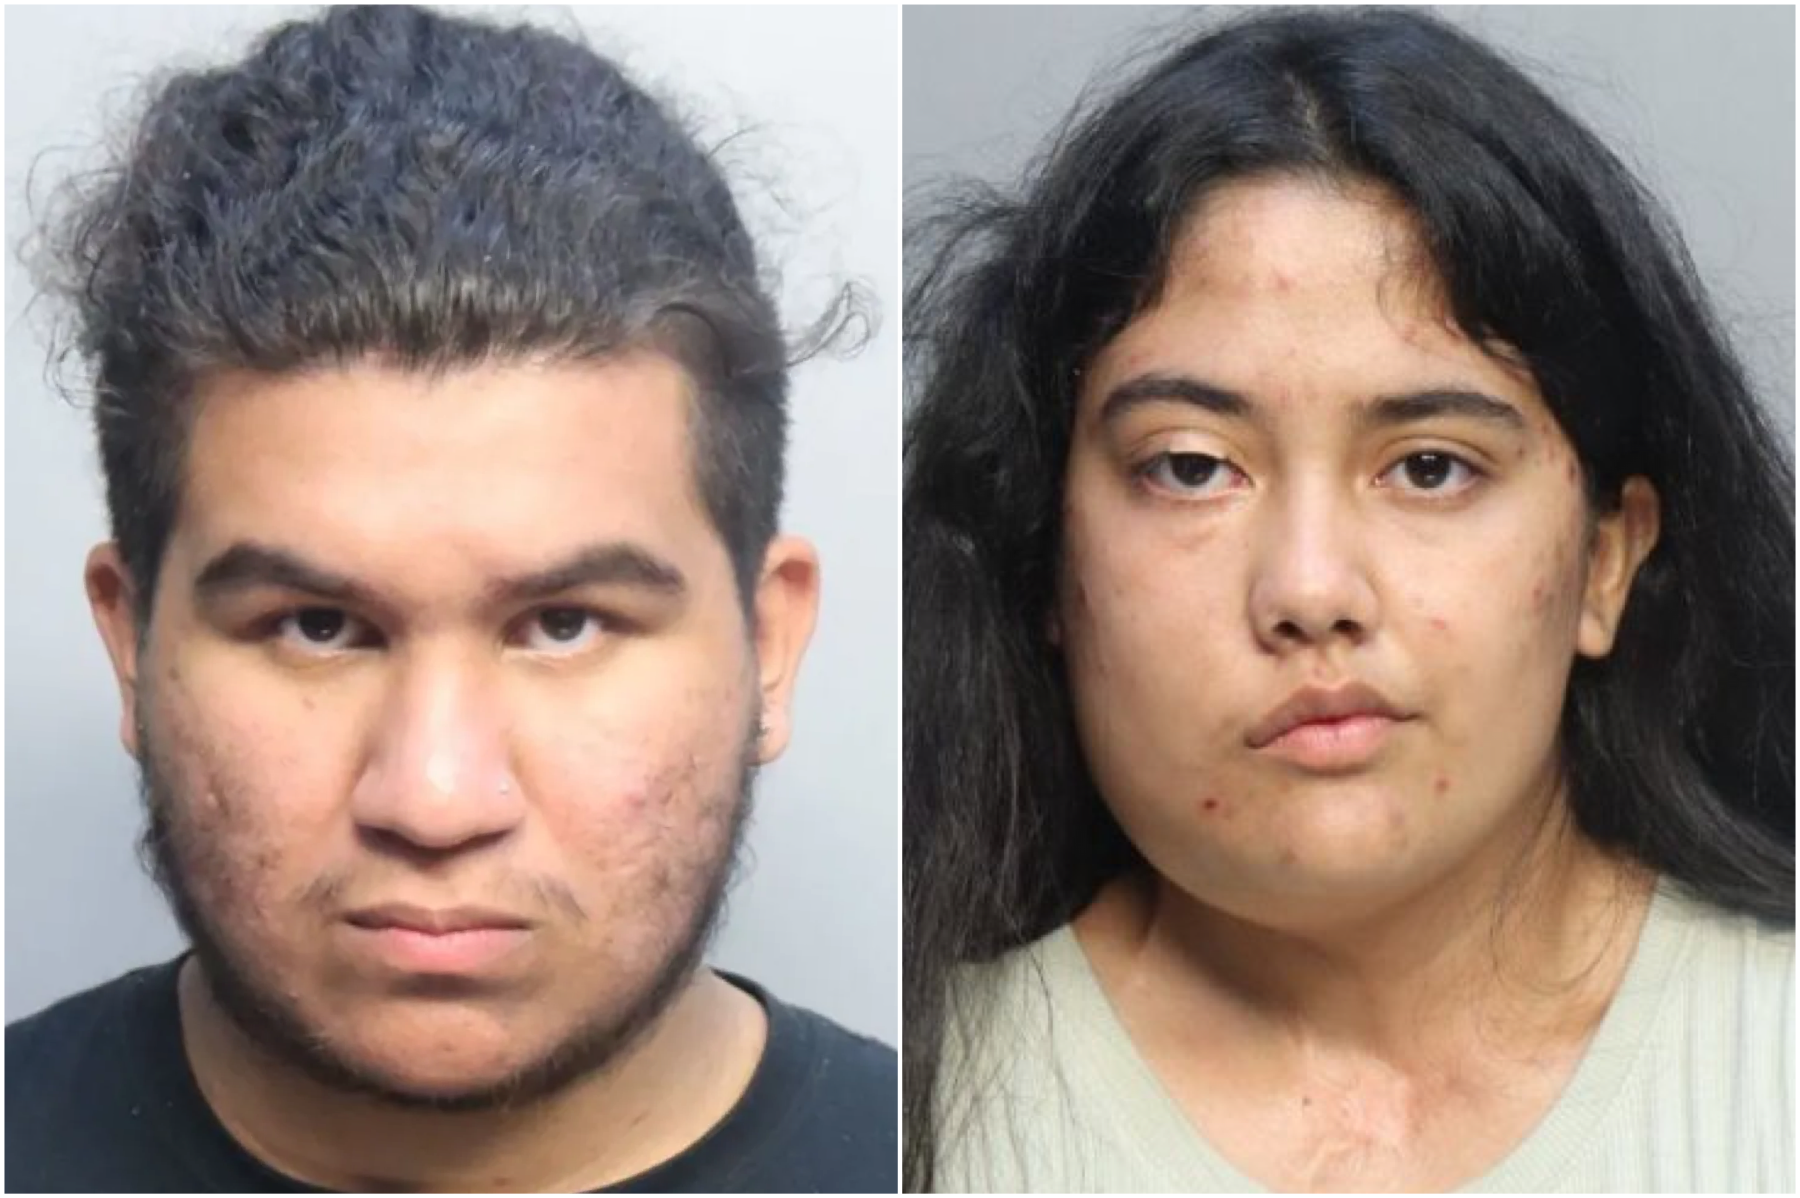 <p>Gamaliel Soza, 18, allegedly tried to convince Jazmin Paez, also 18, to kill her own son, telling her ‘the kid is the problem’</p>